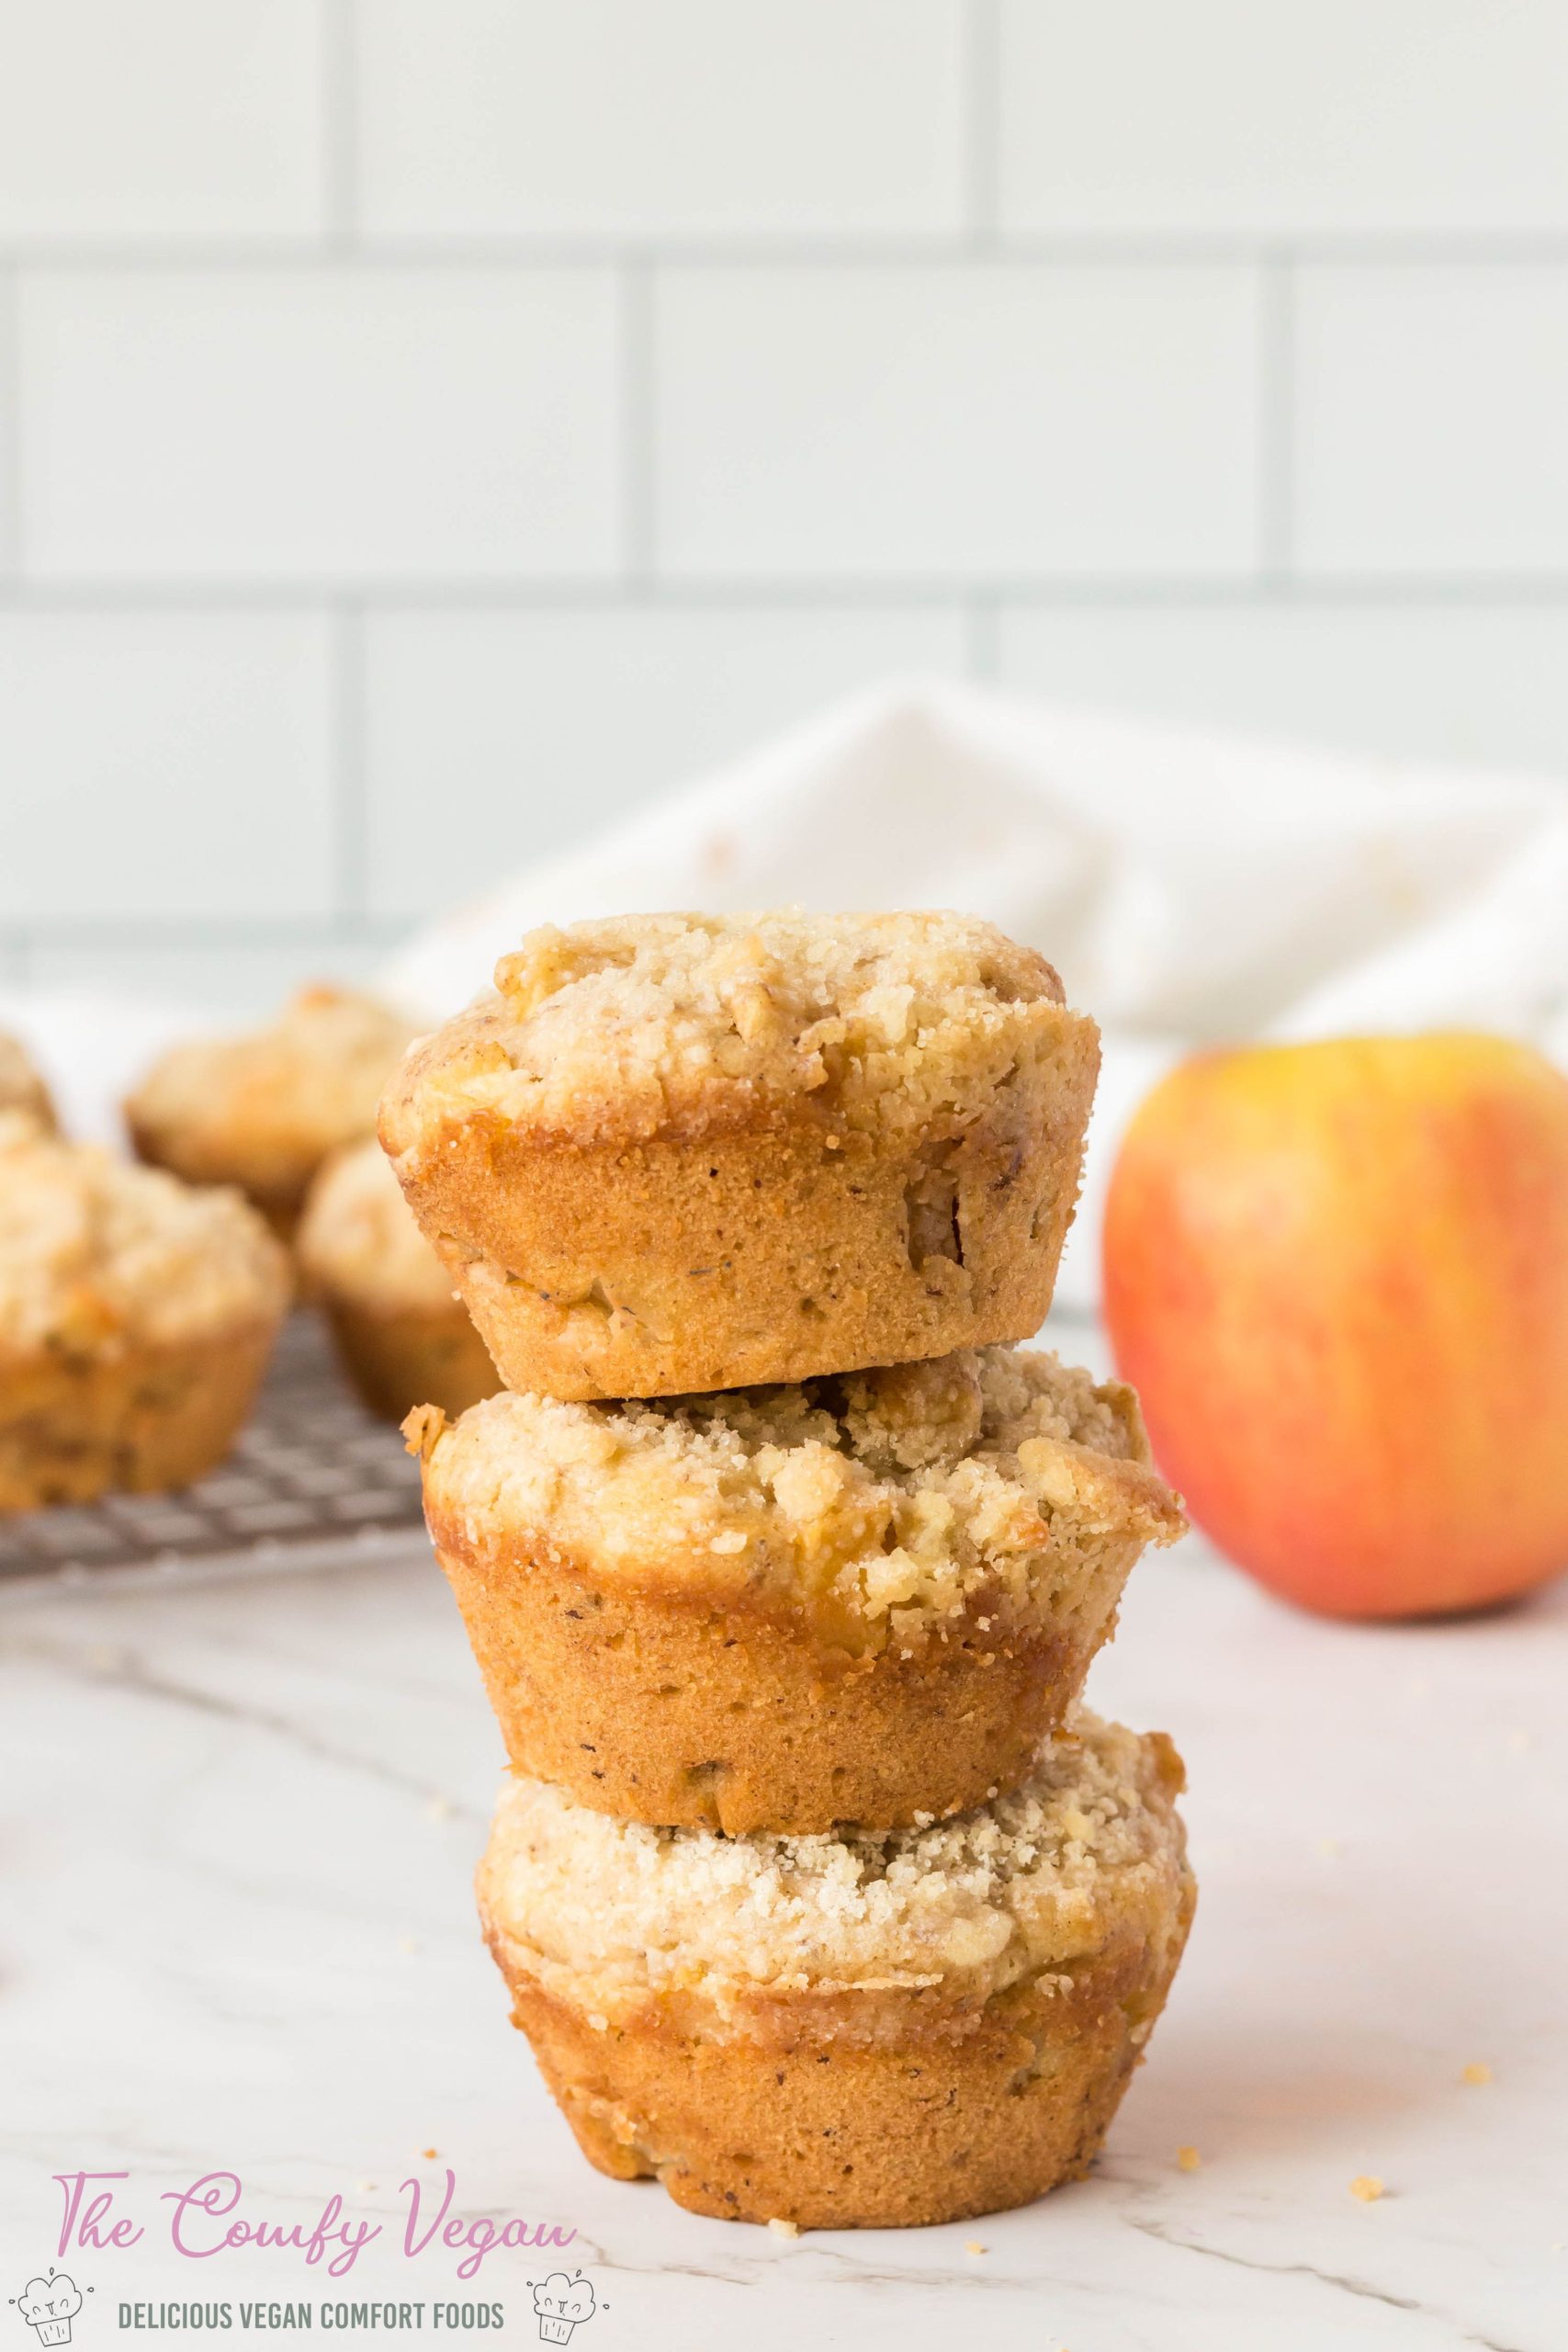 The ultimate fall muffin you're going to love these Vegan Apple Muffins. They're soft, sweet, and topped with a delicious crumb coat. These easy-to-make moist muffins will remind you of ones you'll find at your local bakery. They're made in one bowl and ready to enjoy in under 30 minutes!